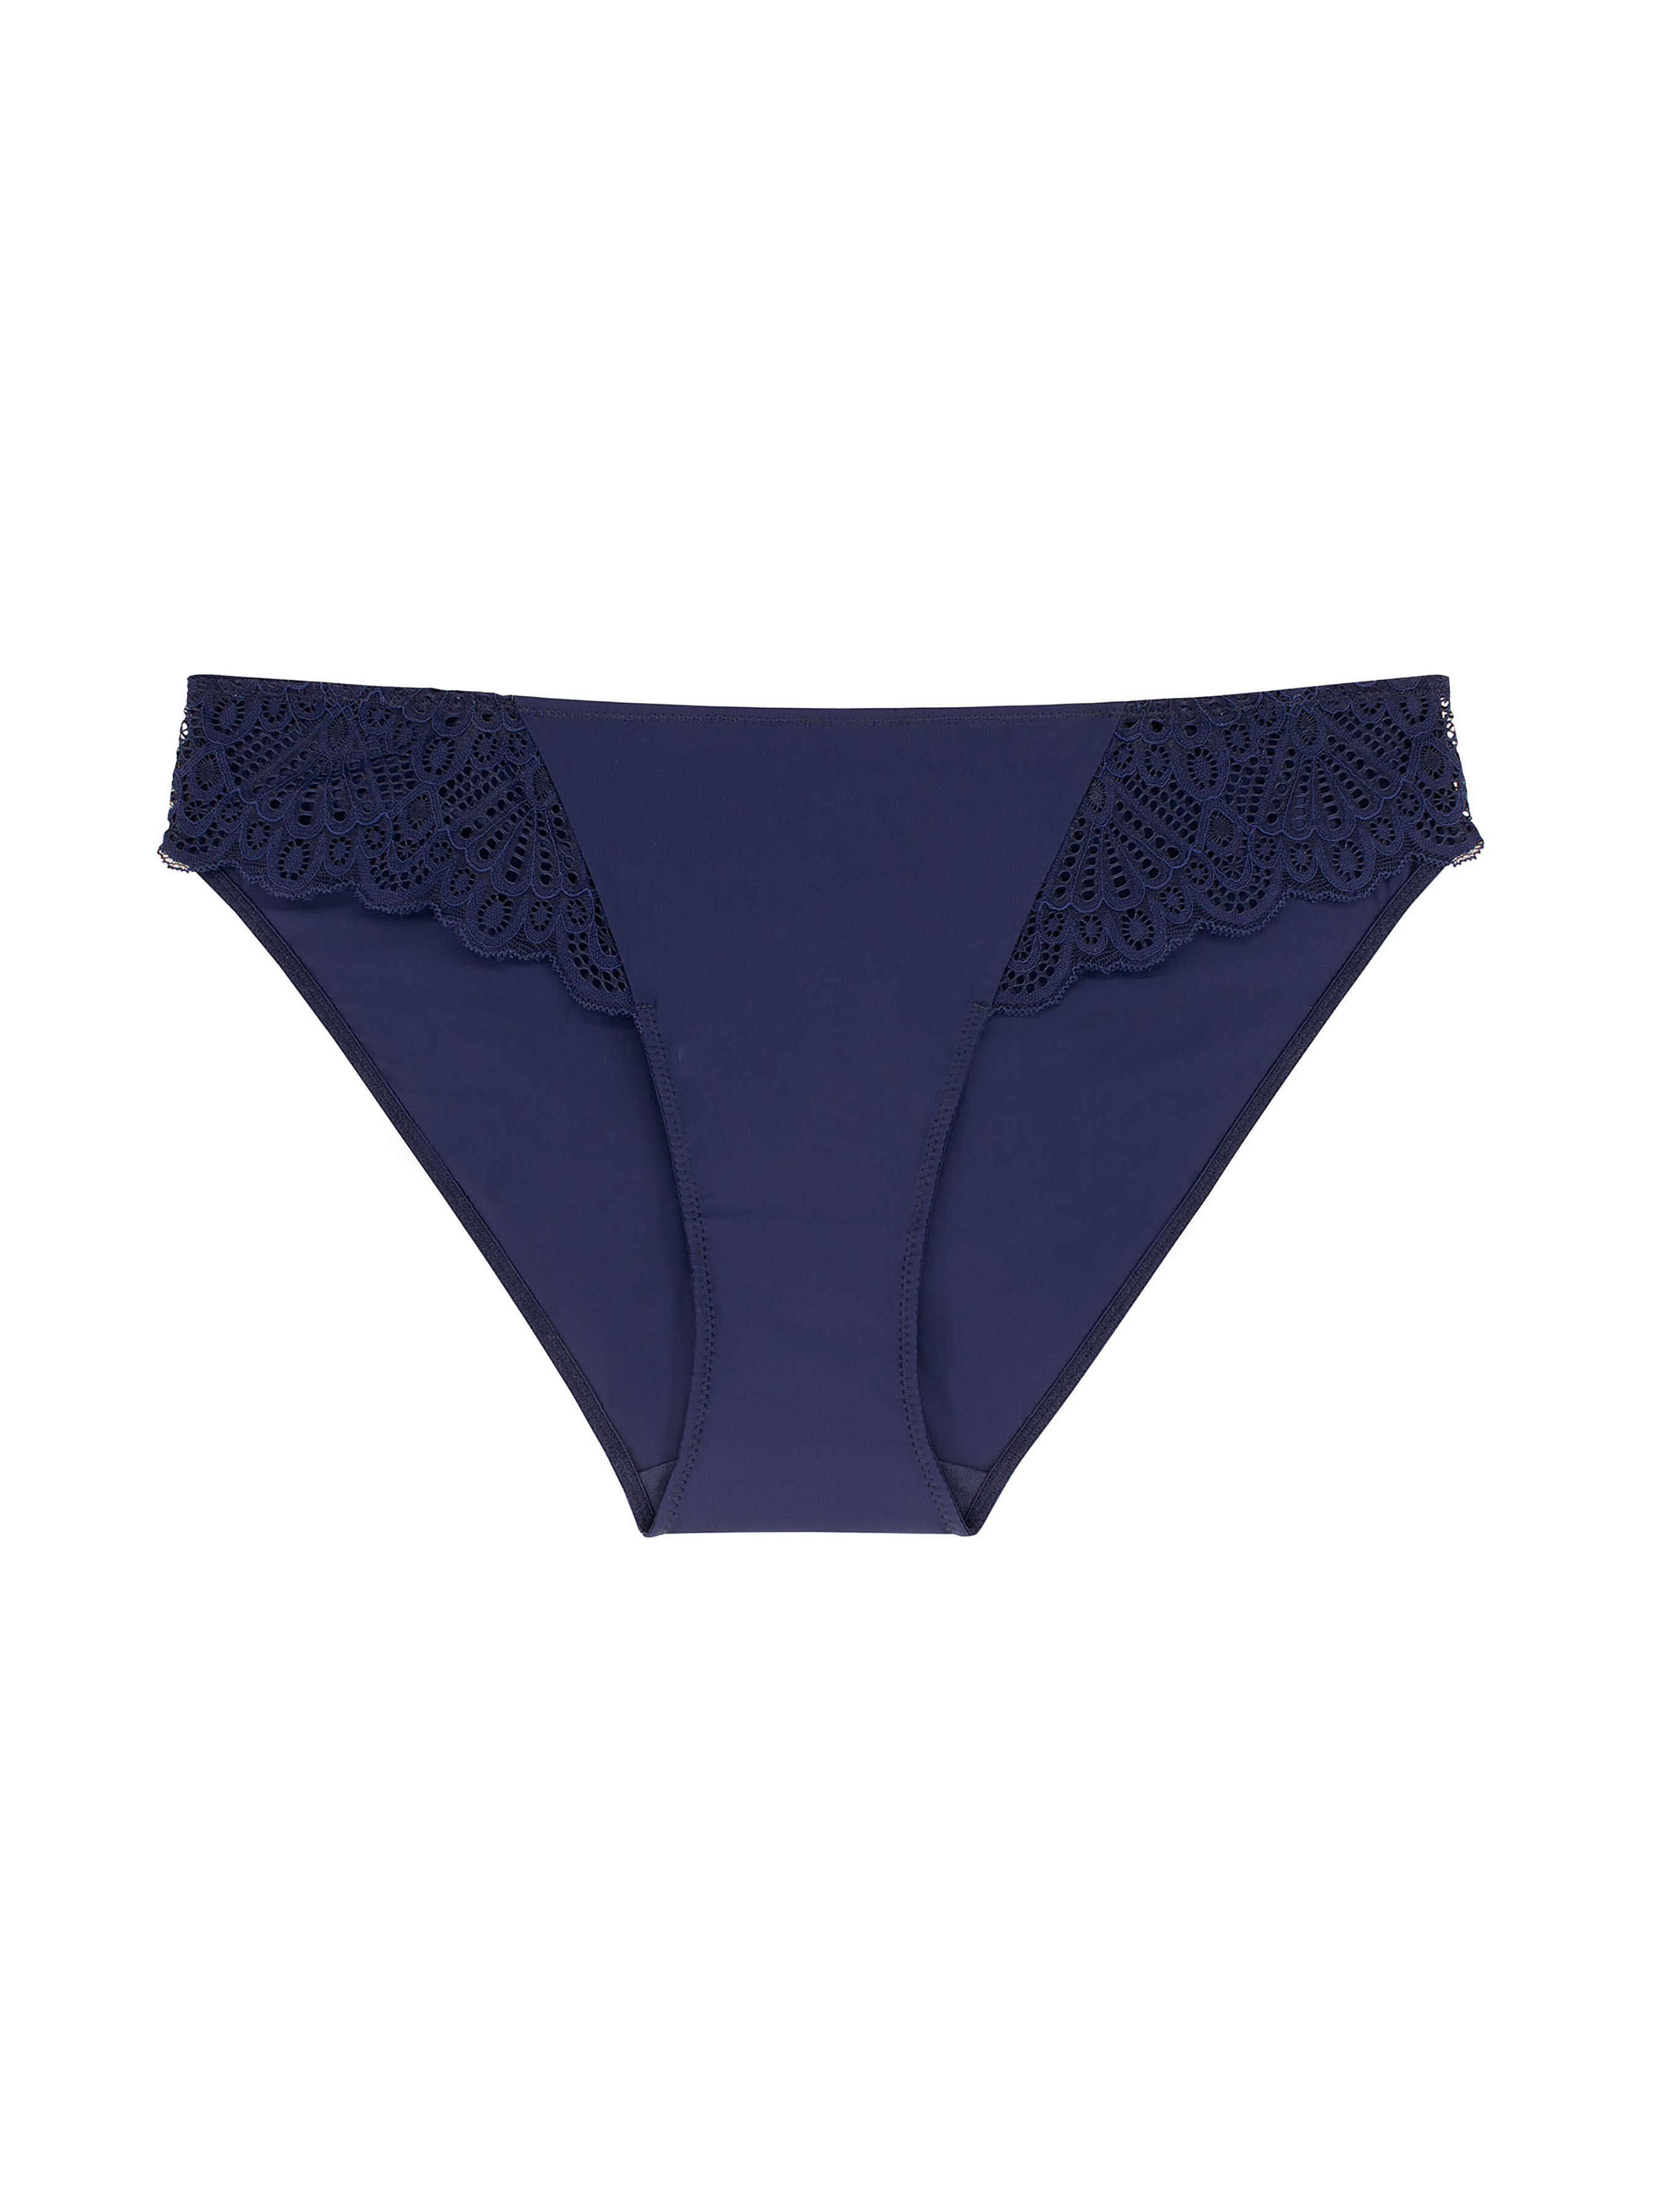 D001822 | AVERY PUSH UP BRIEF